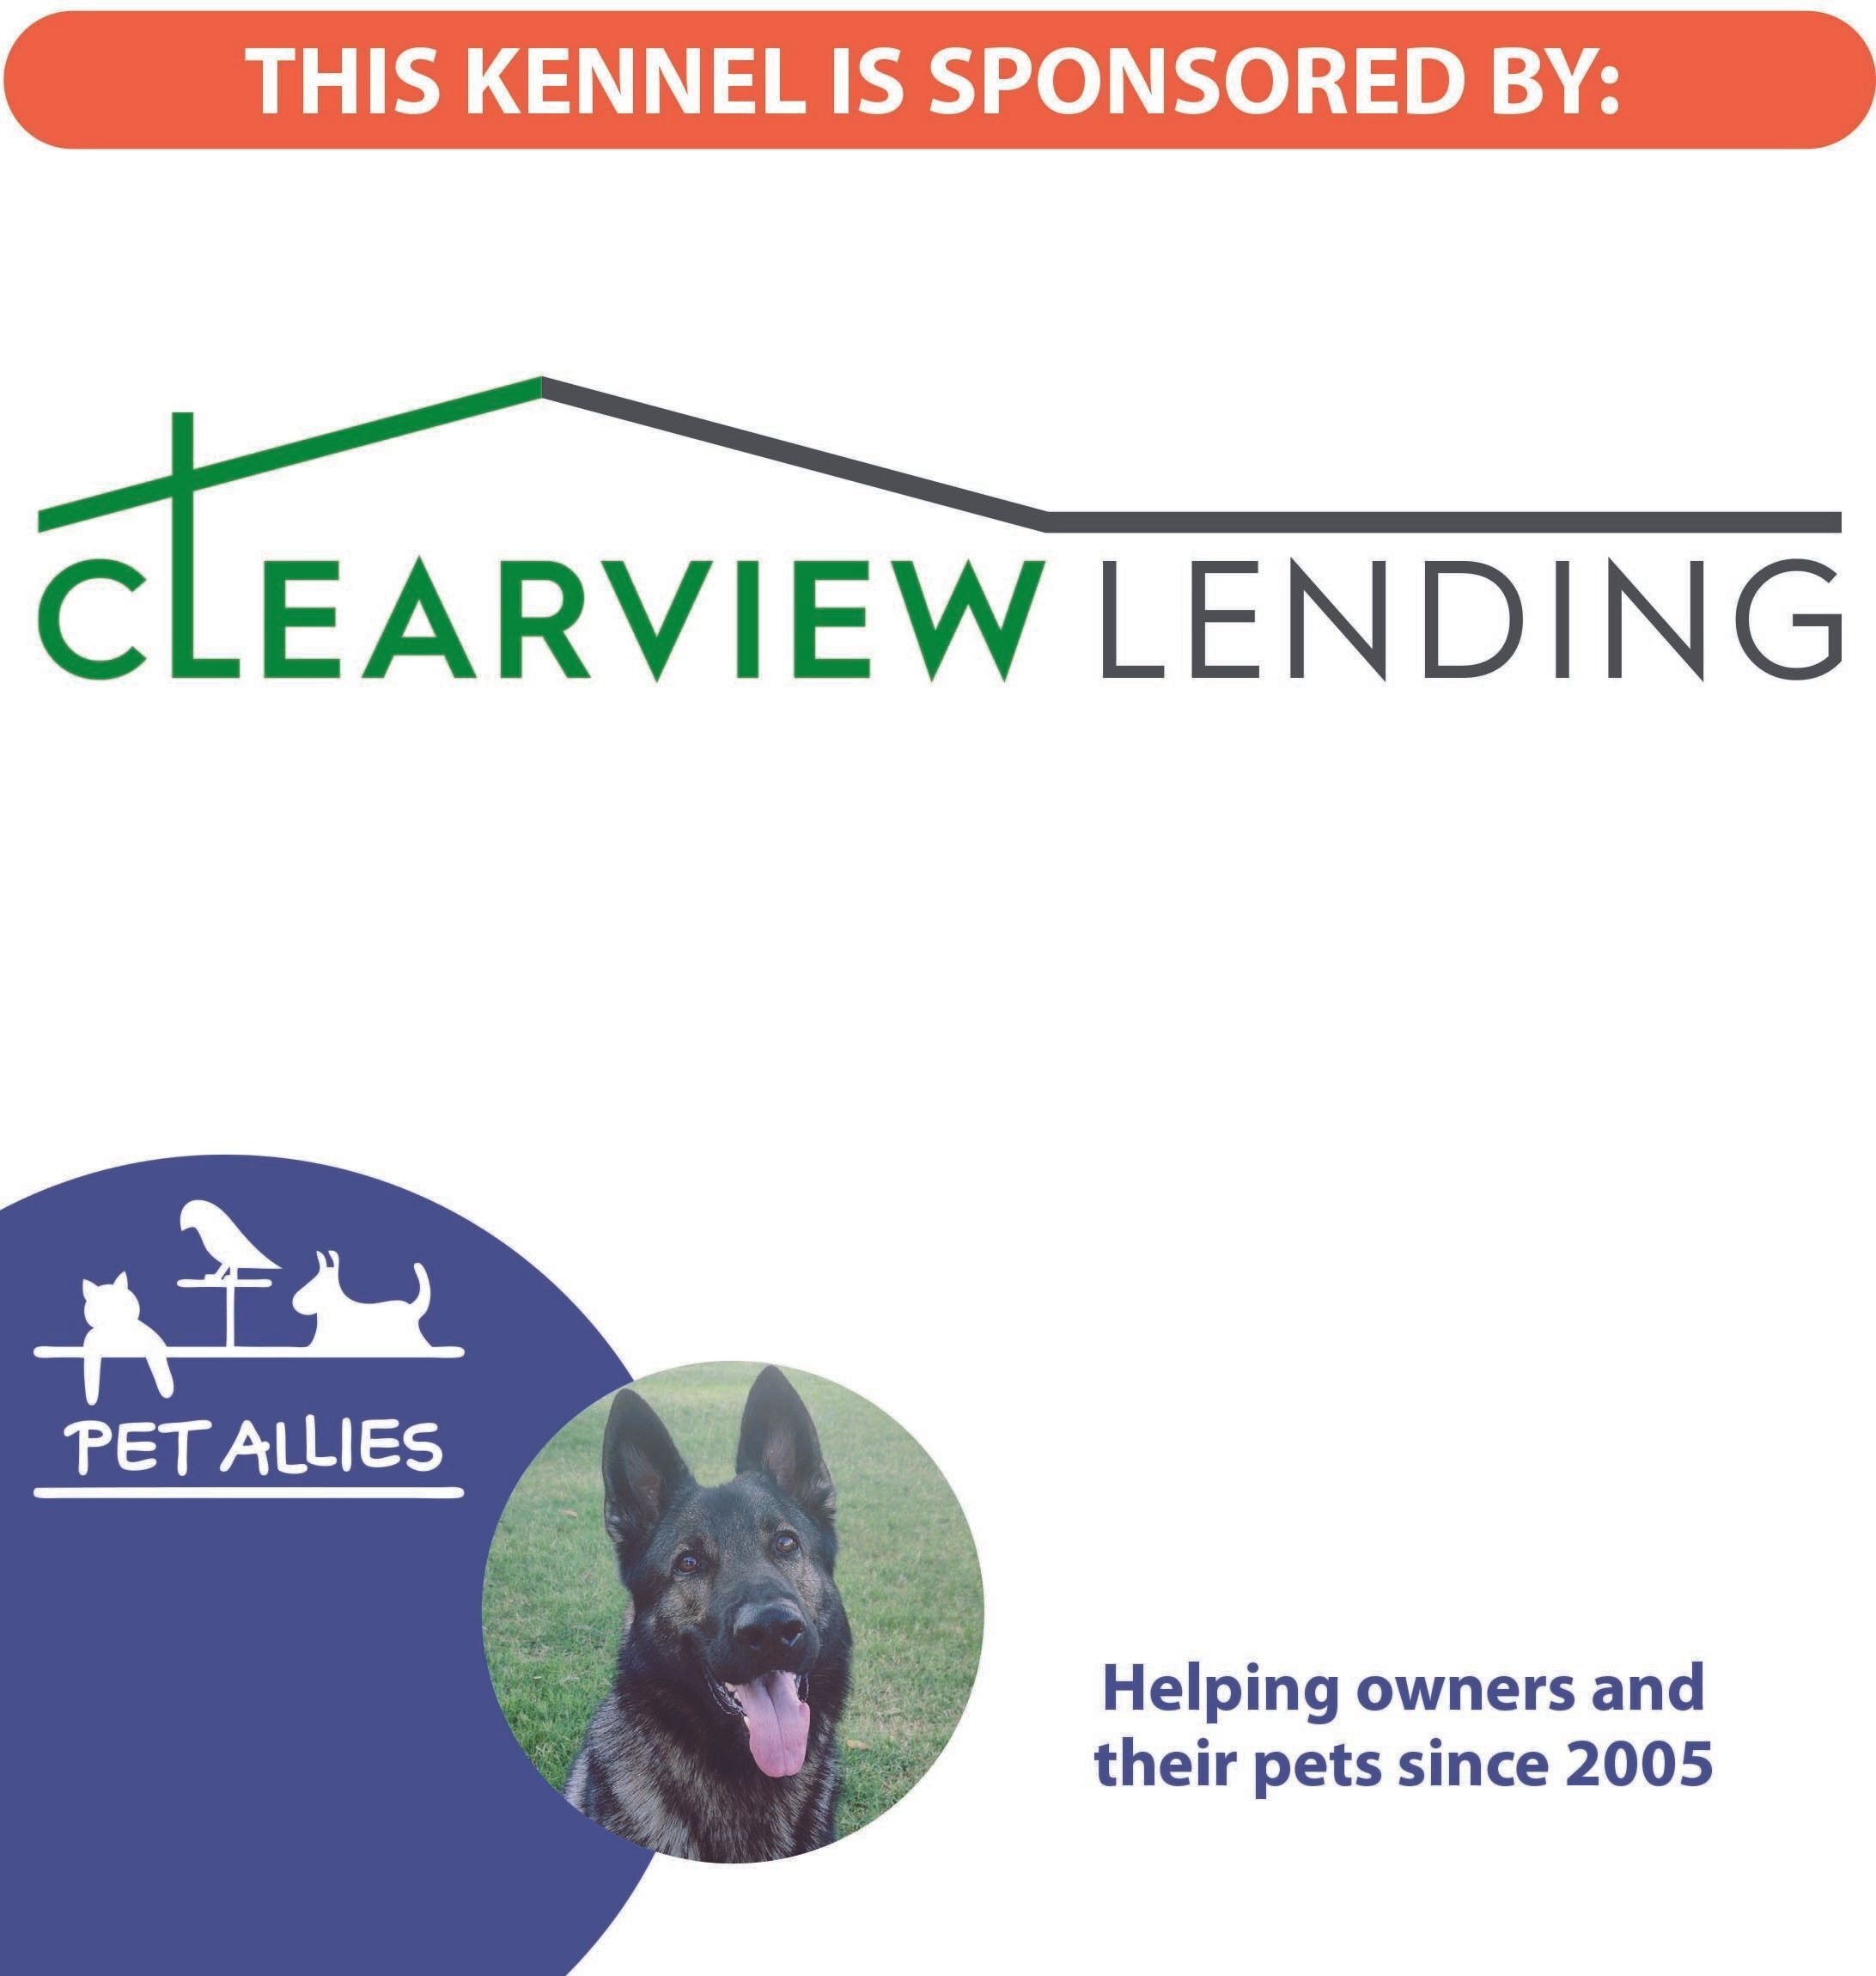 Clearview Lending